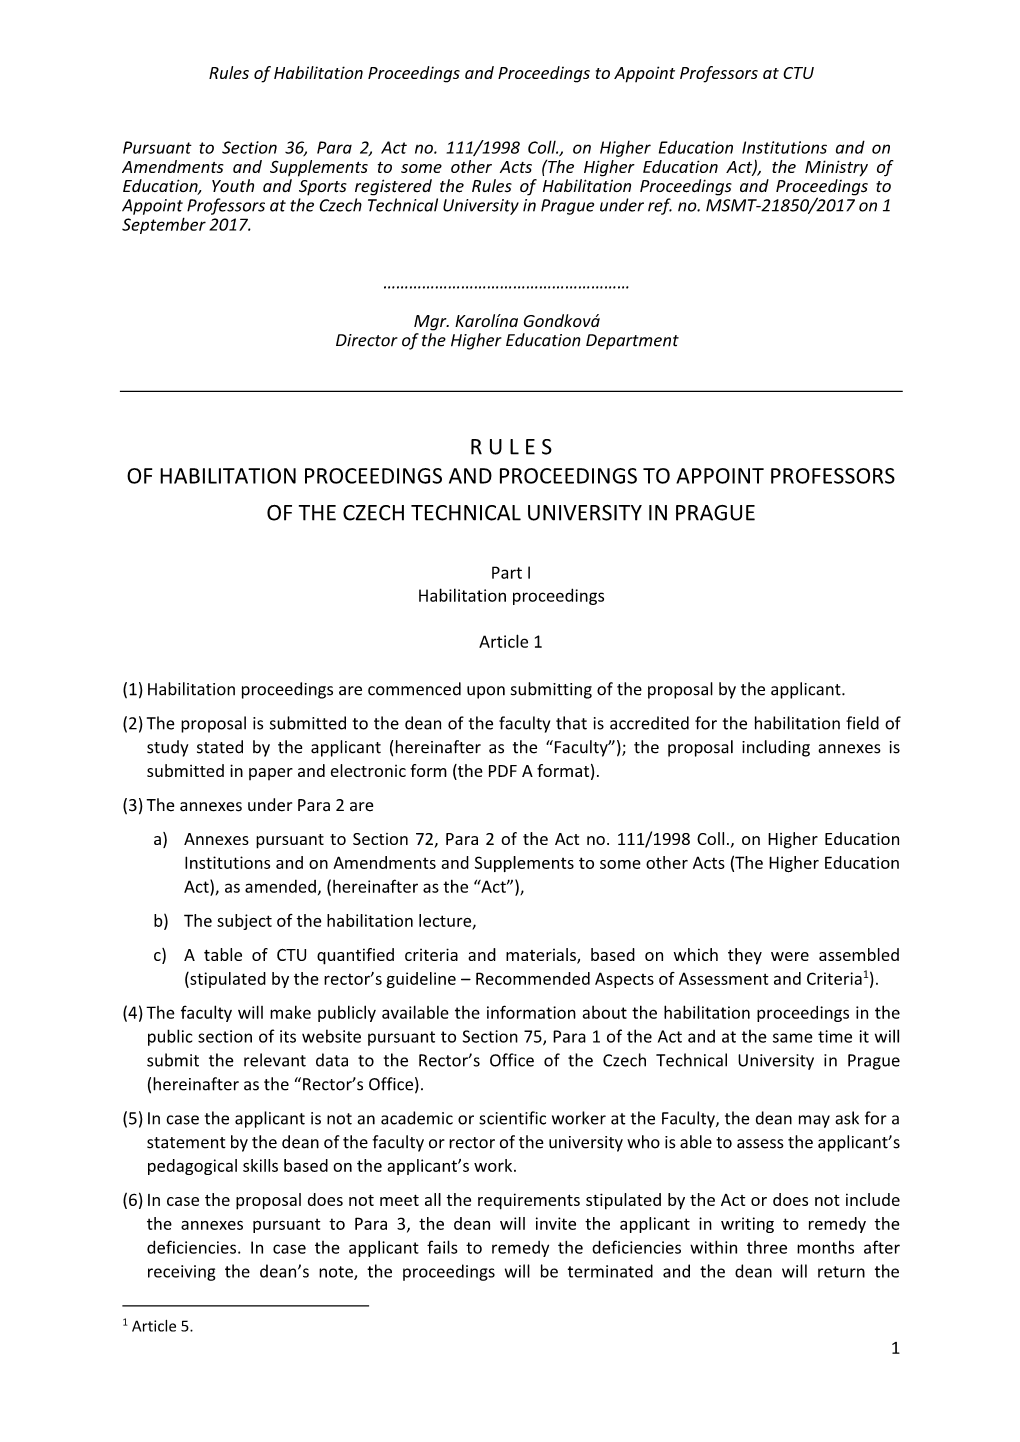 Rules of Habilitation Proceedings and Proceedings to Appoint Professors at CTU